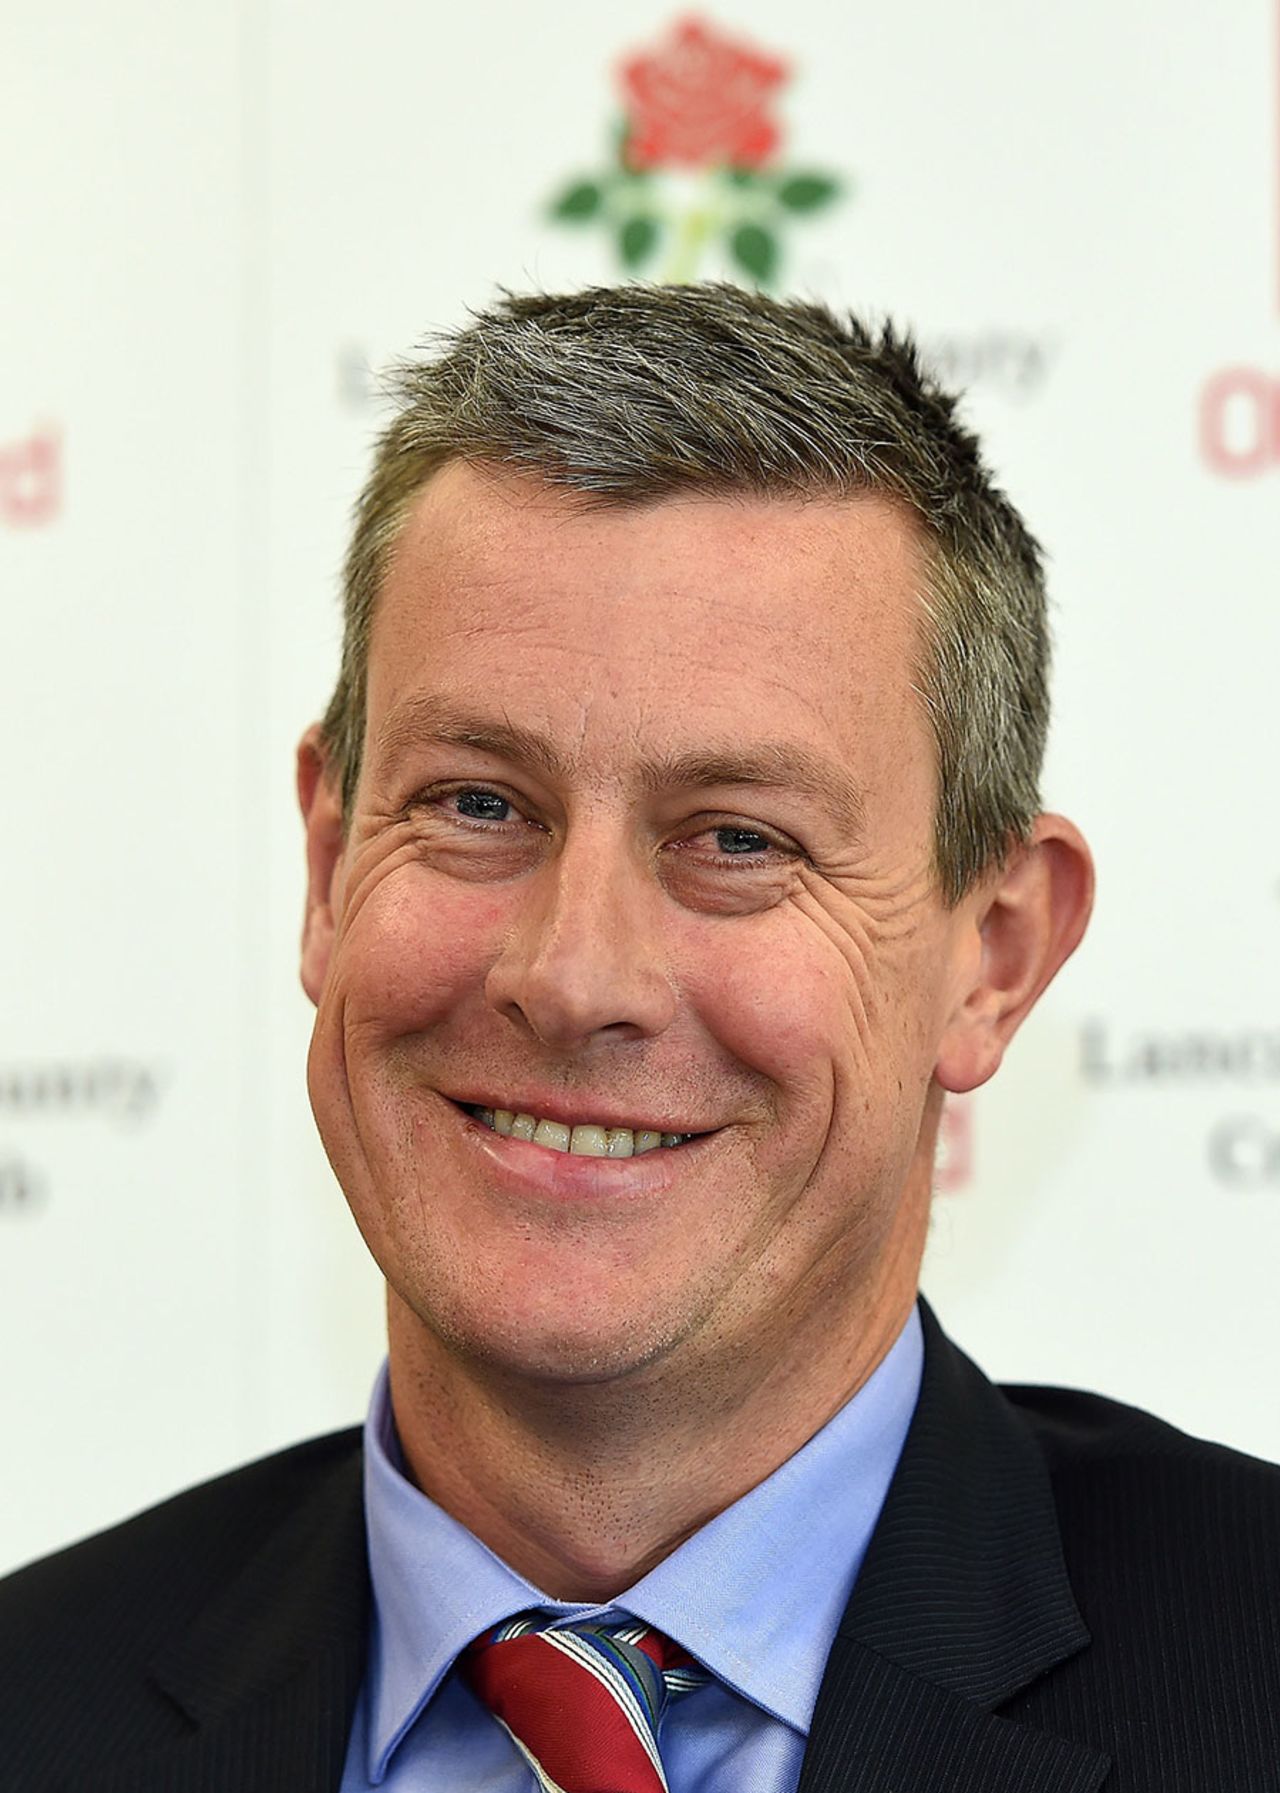 Ashley Giles was unveiled as Lancashire's new cricket director and head coach, Old Trafford, October 8, 2014